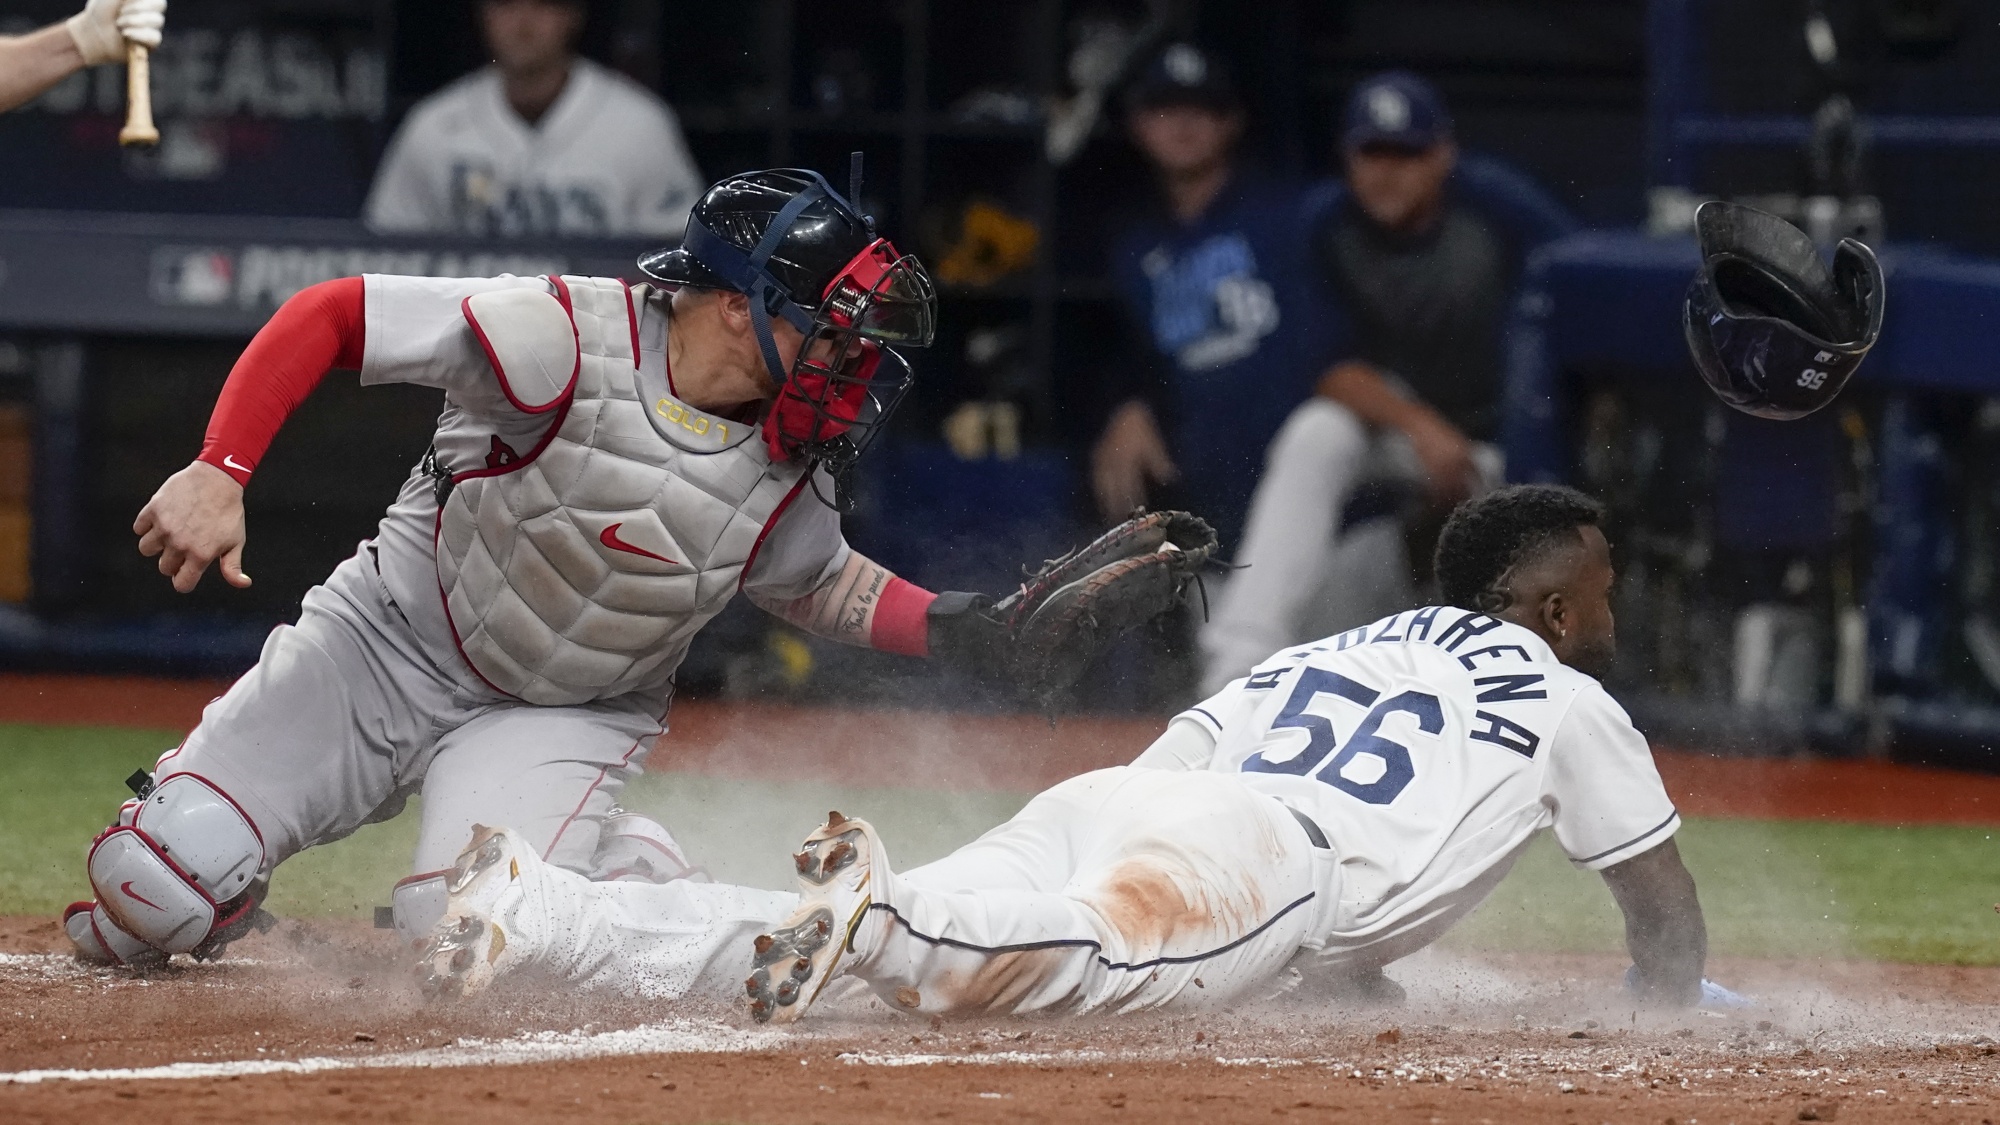 Omar Vizquel, steals second in the bottom of the third inning. The News  Photo - Getty Images